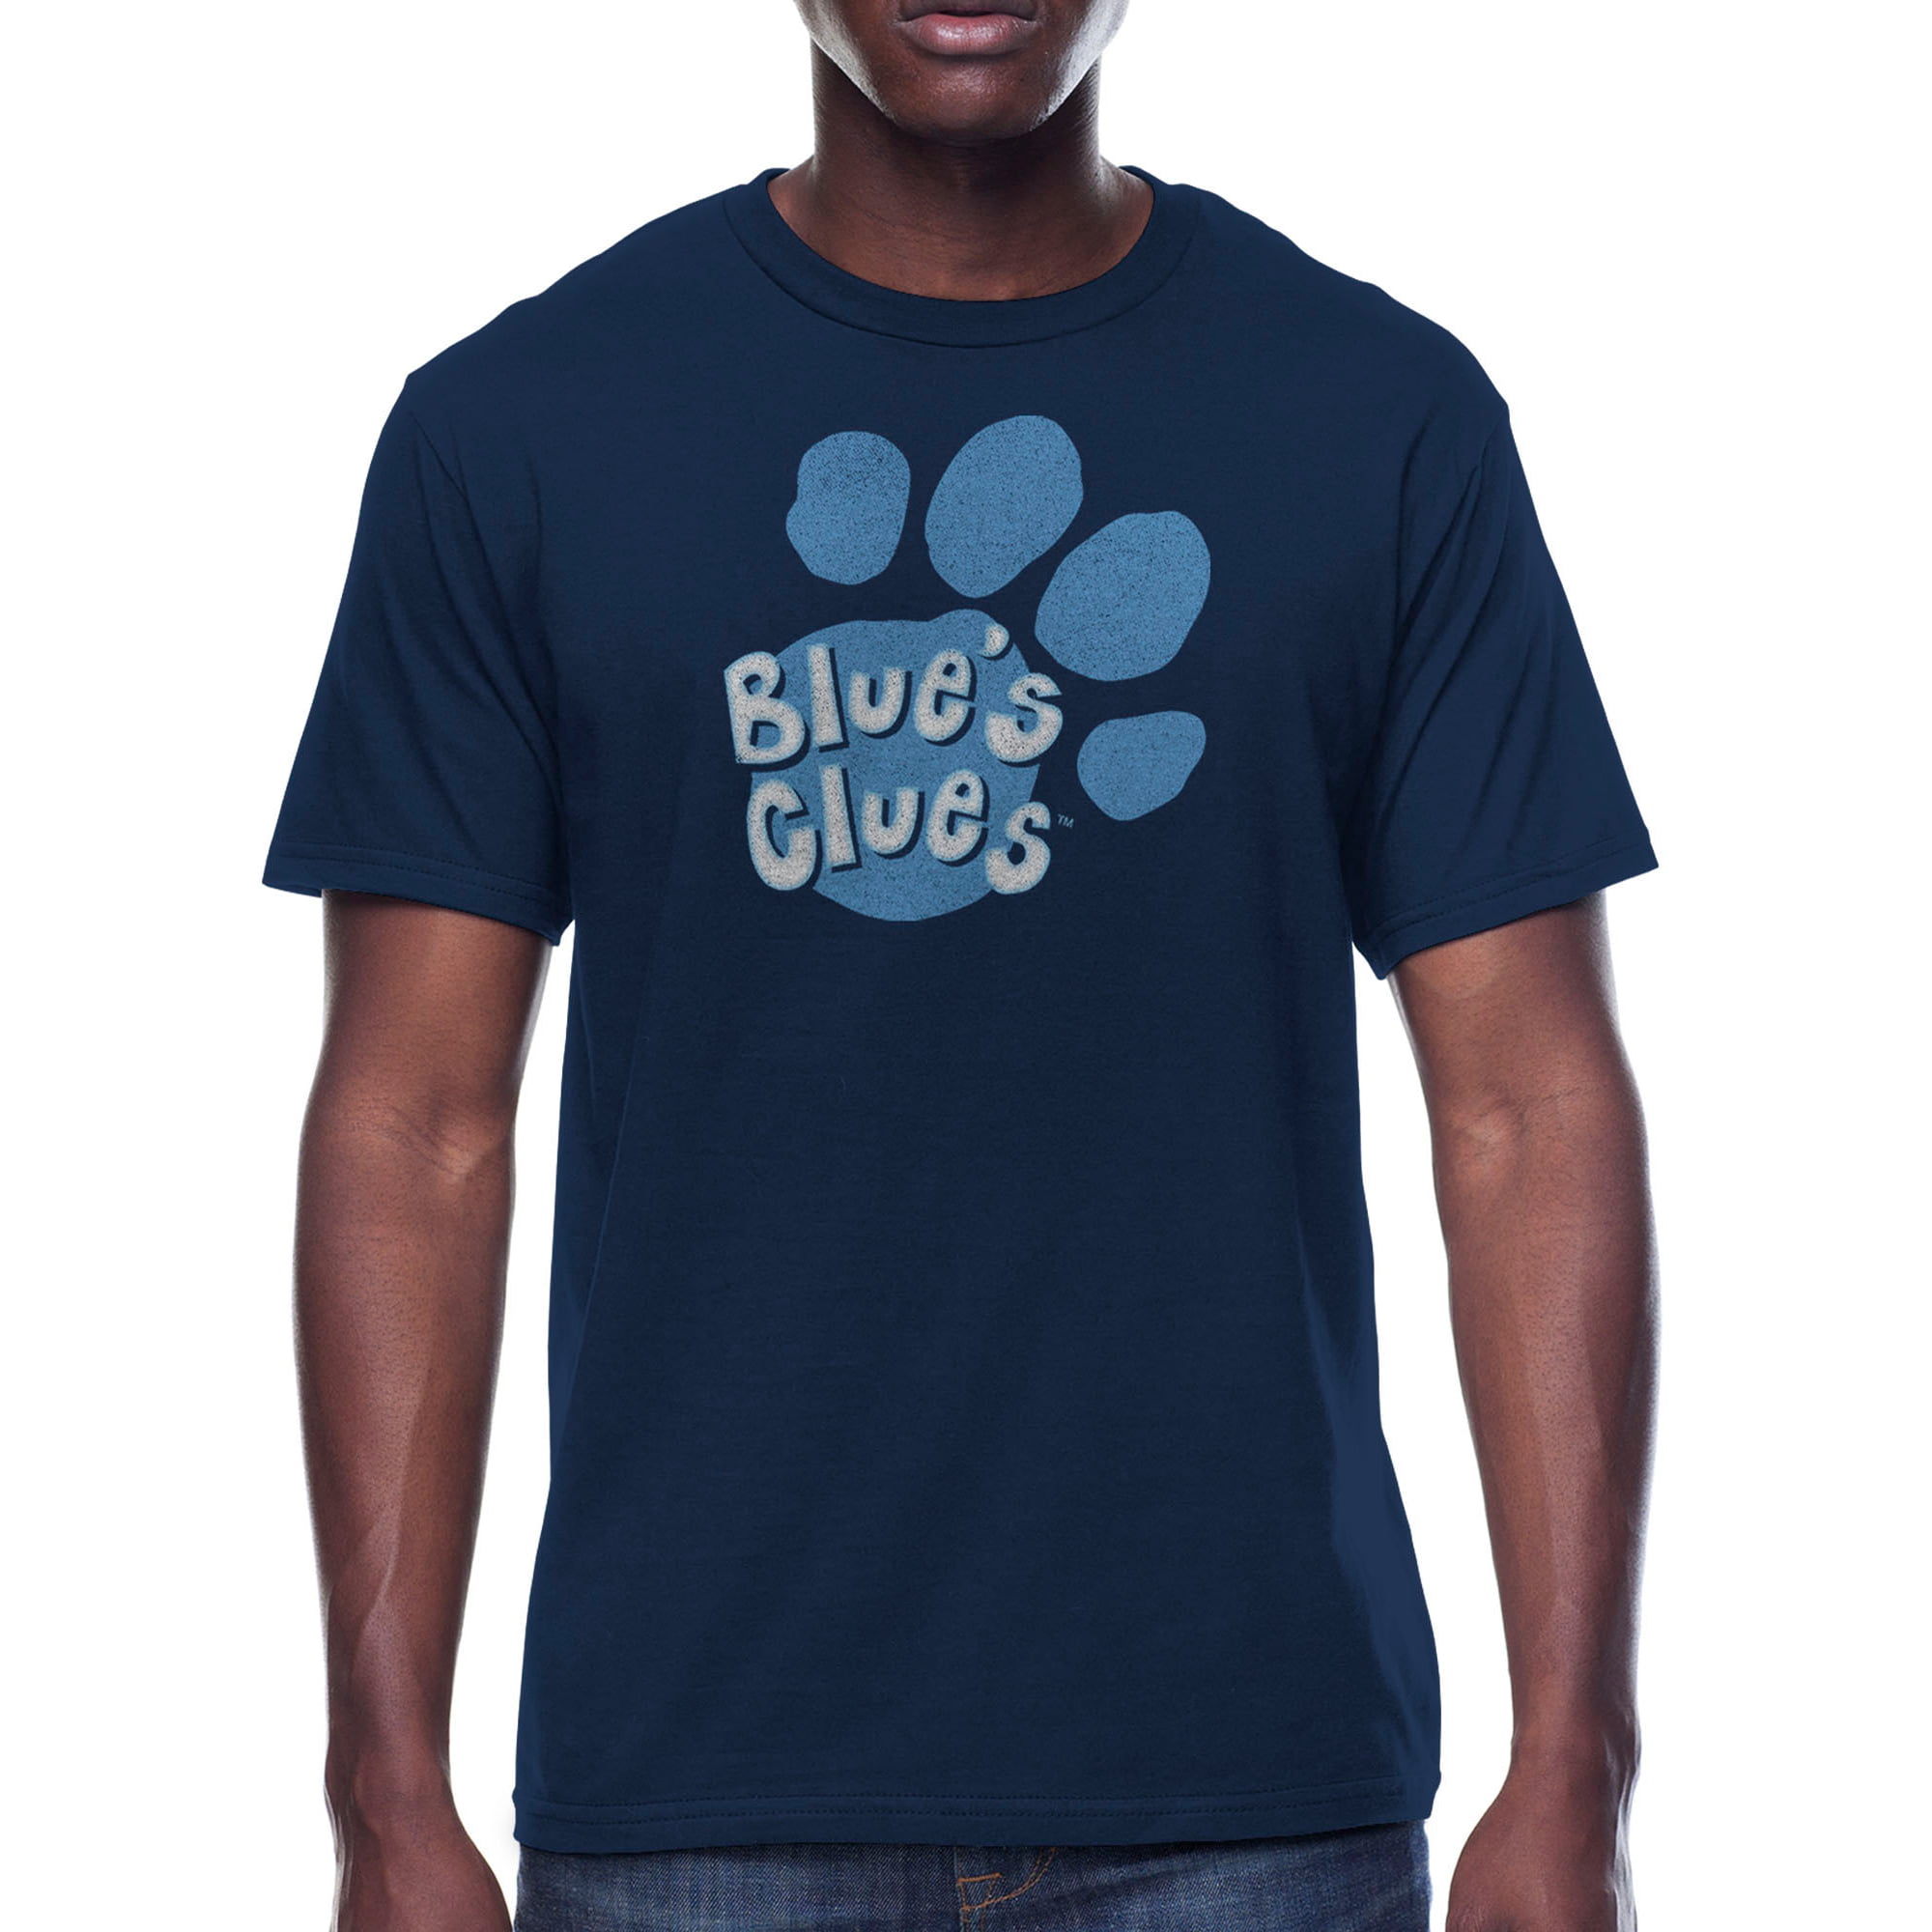 Blue's Clue's Mens Logo Short Sleeve Graphic Tee (Navy) $4 + Free Shipping w/ Walmart+ or $35+